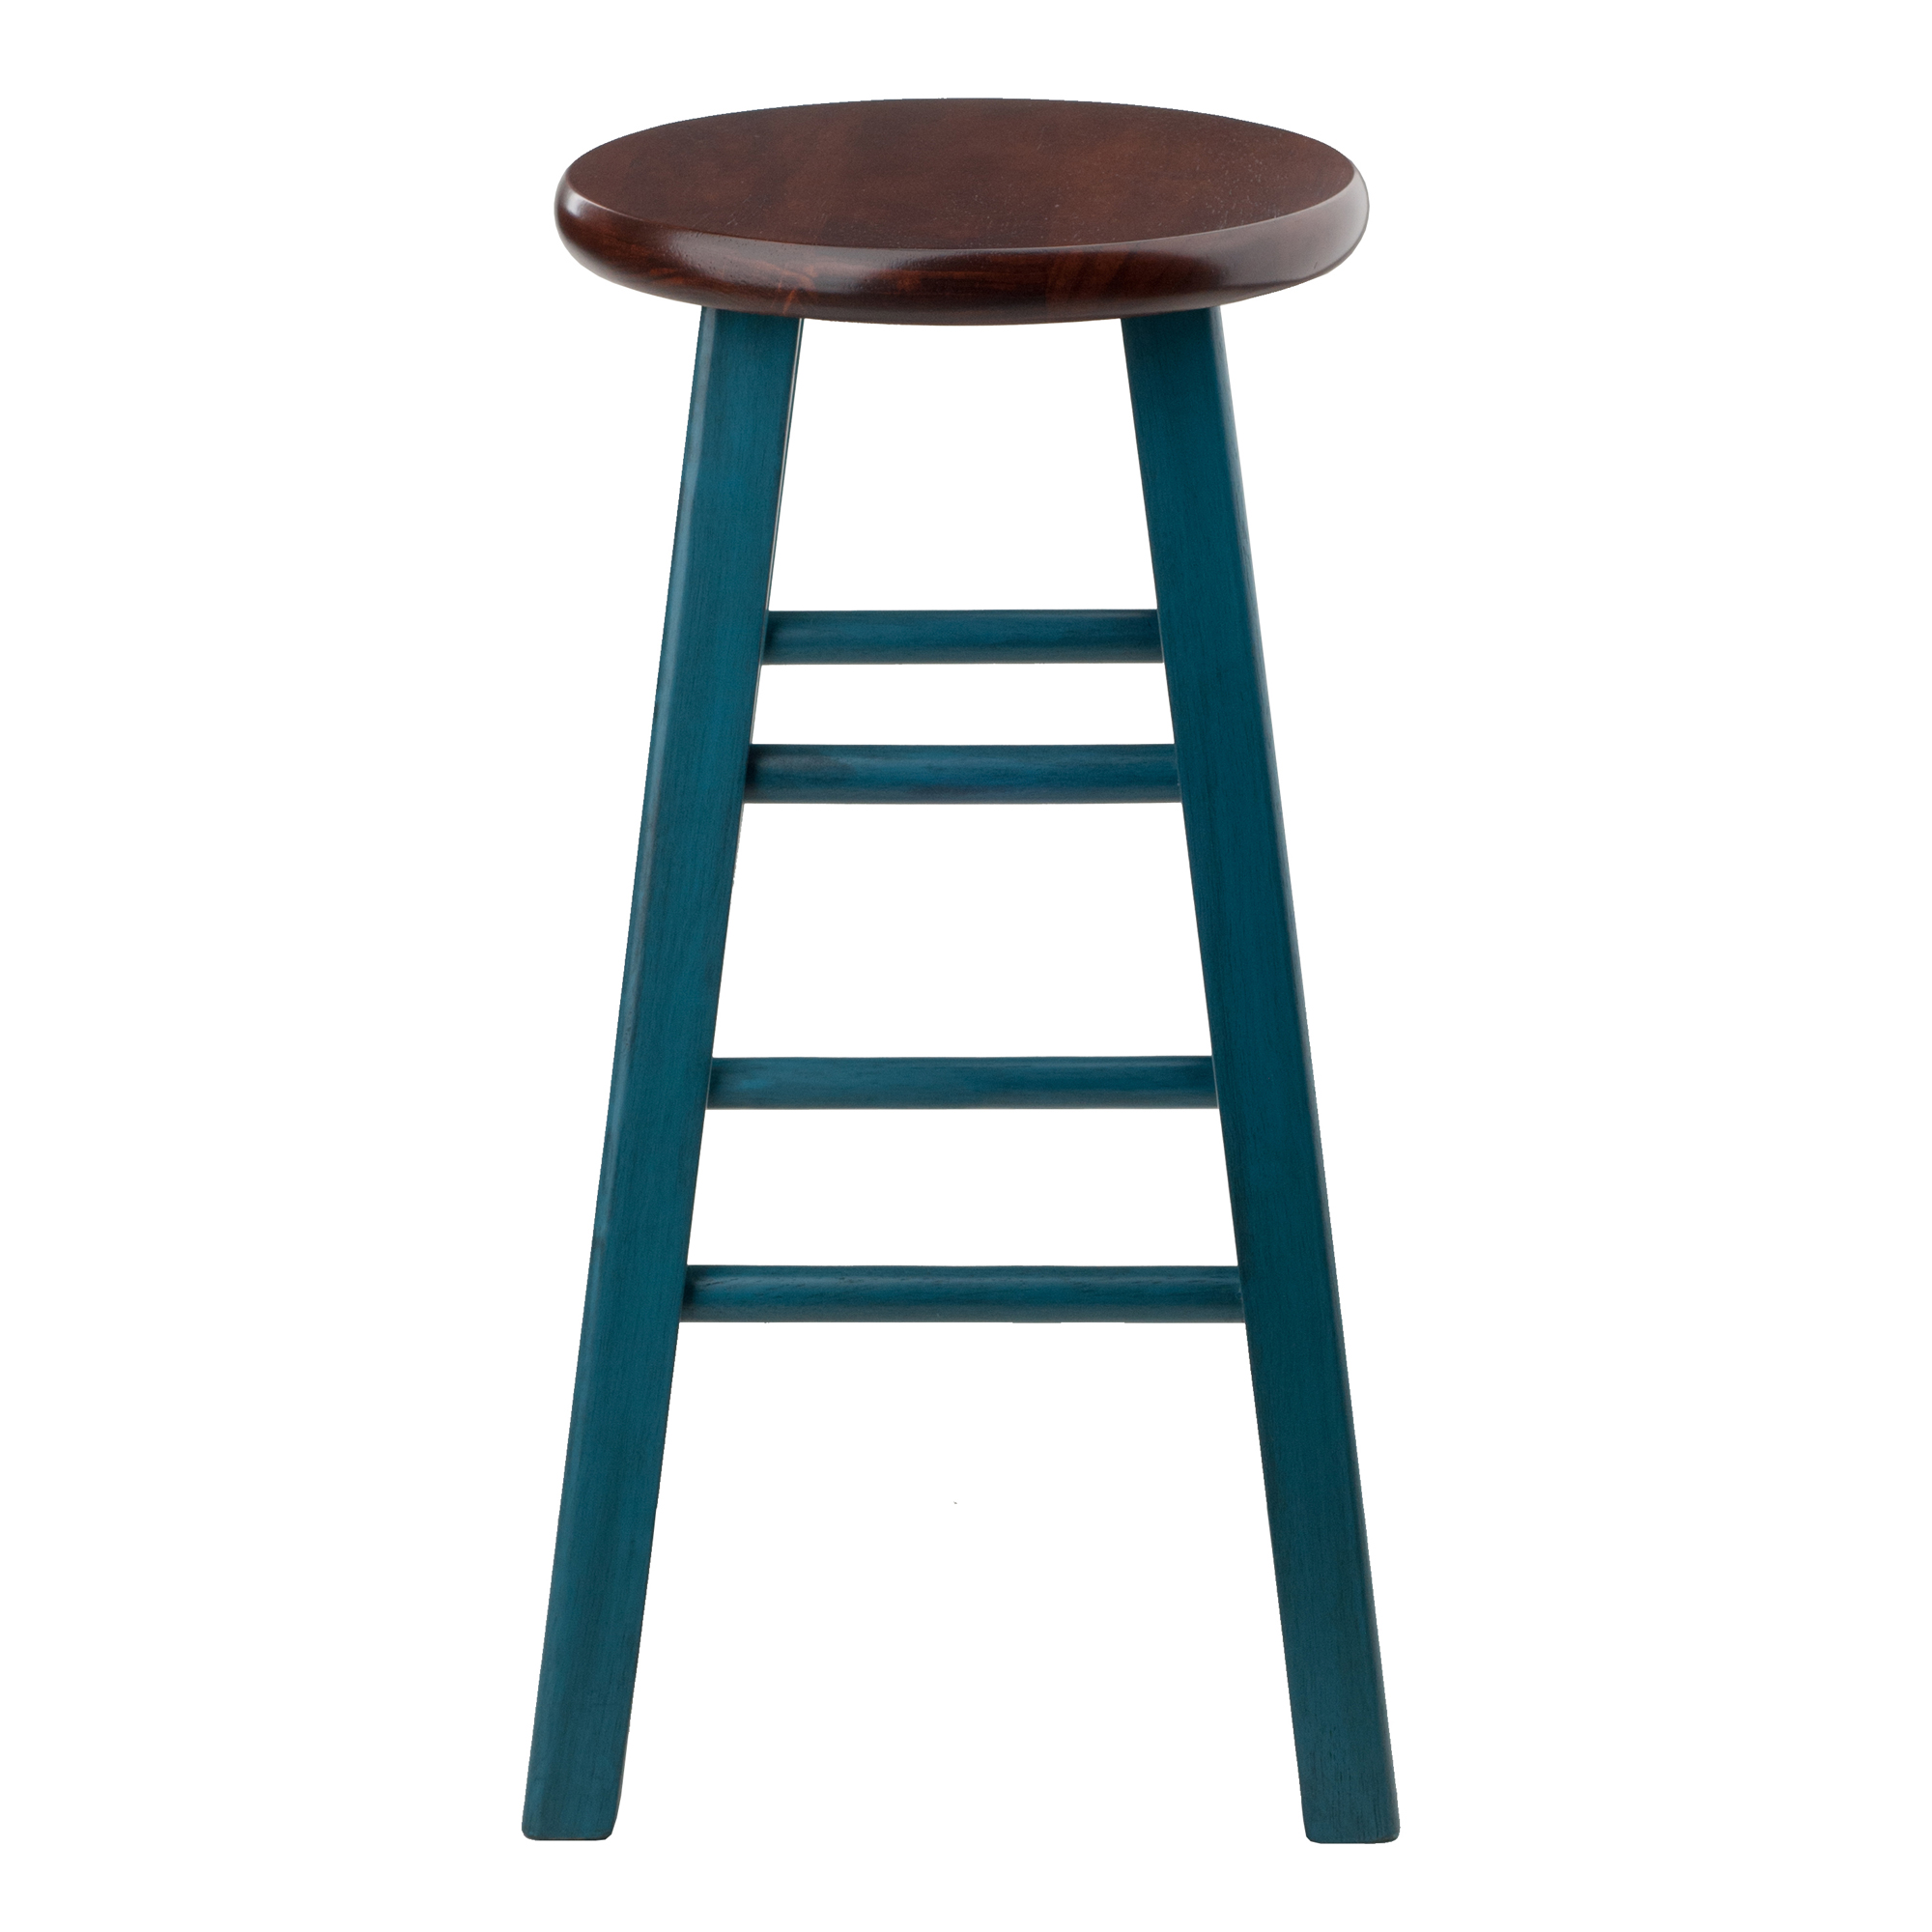 Winsome Wood Ivy 24" Counter Stool, Rustic Teal & Walnut Finish - image 3 of 6